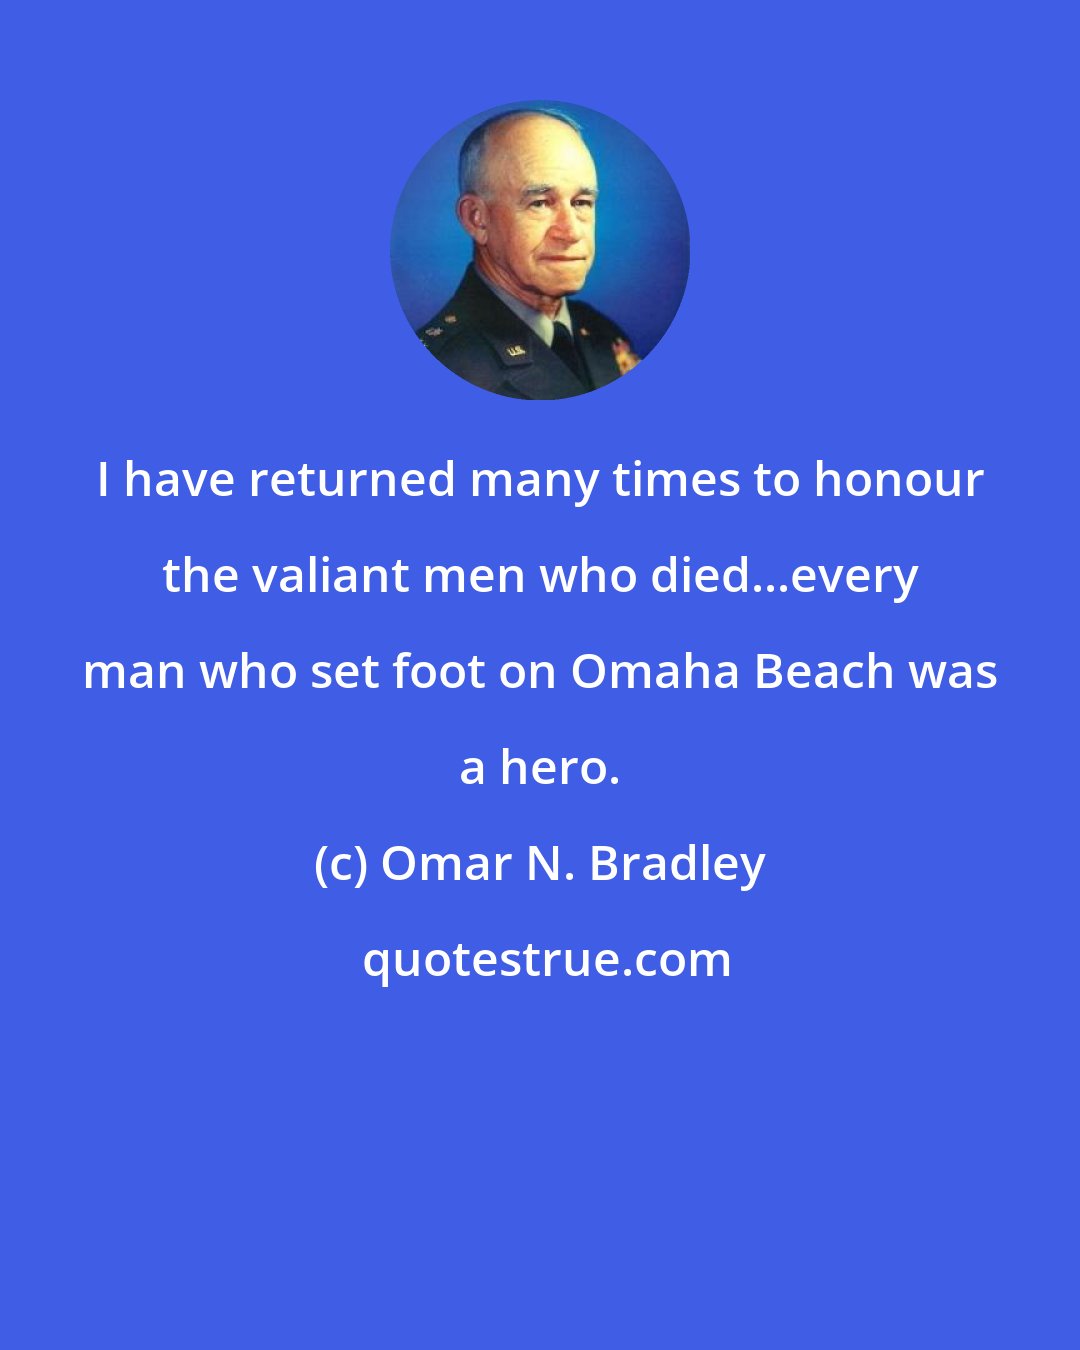 Omar N. Bradley: I have returned many times to honour the valiant men who died...every man who set foot on Omaha Beach was a hero.